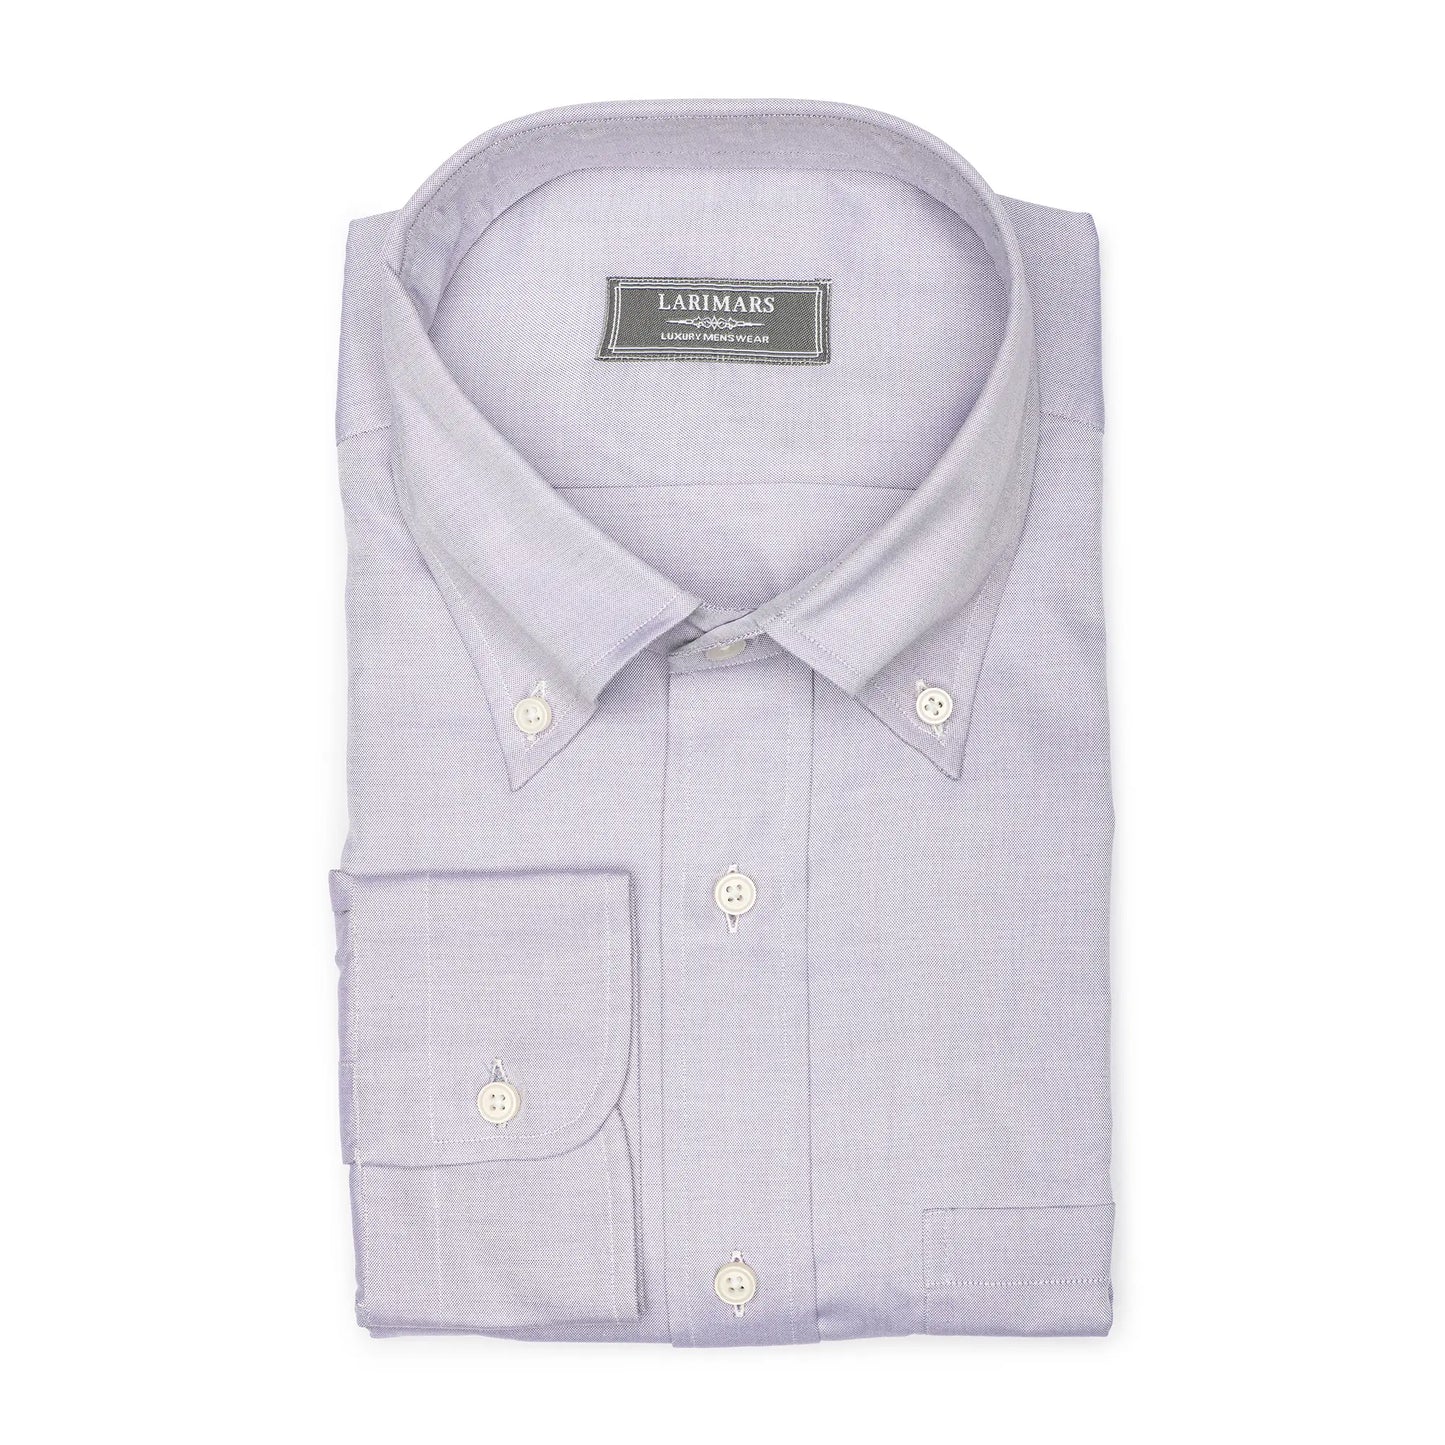 Mauve Pin Oxford - Larimars Clothing Men's Formal and casual wear shirts